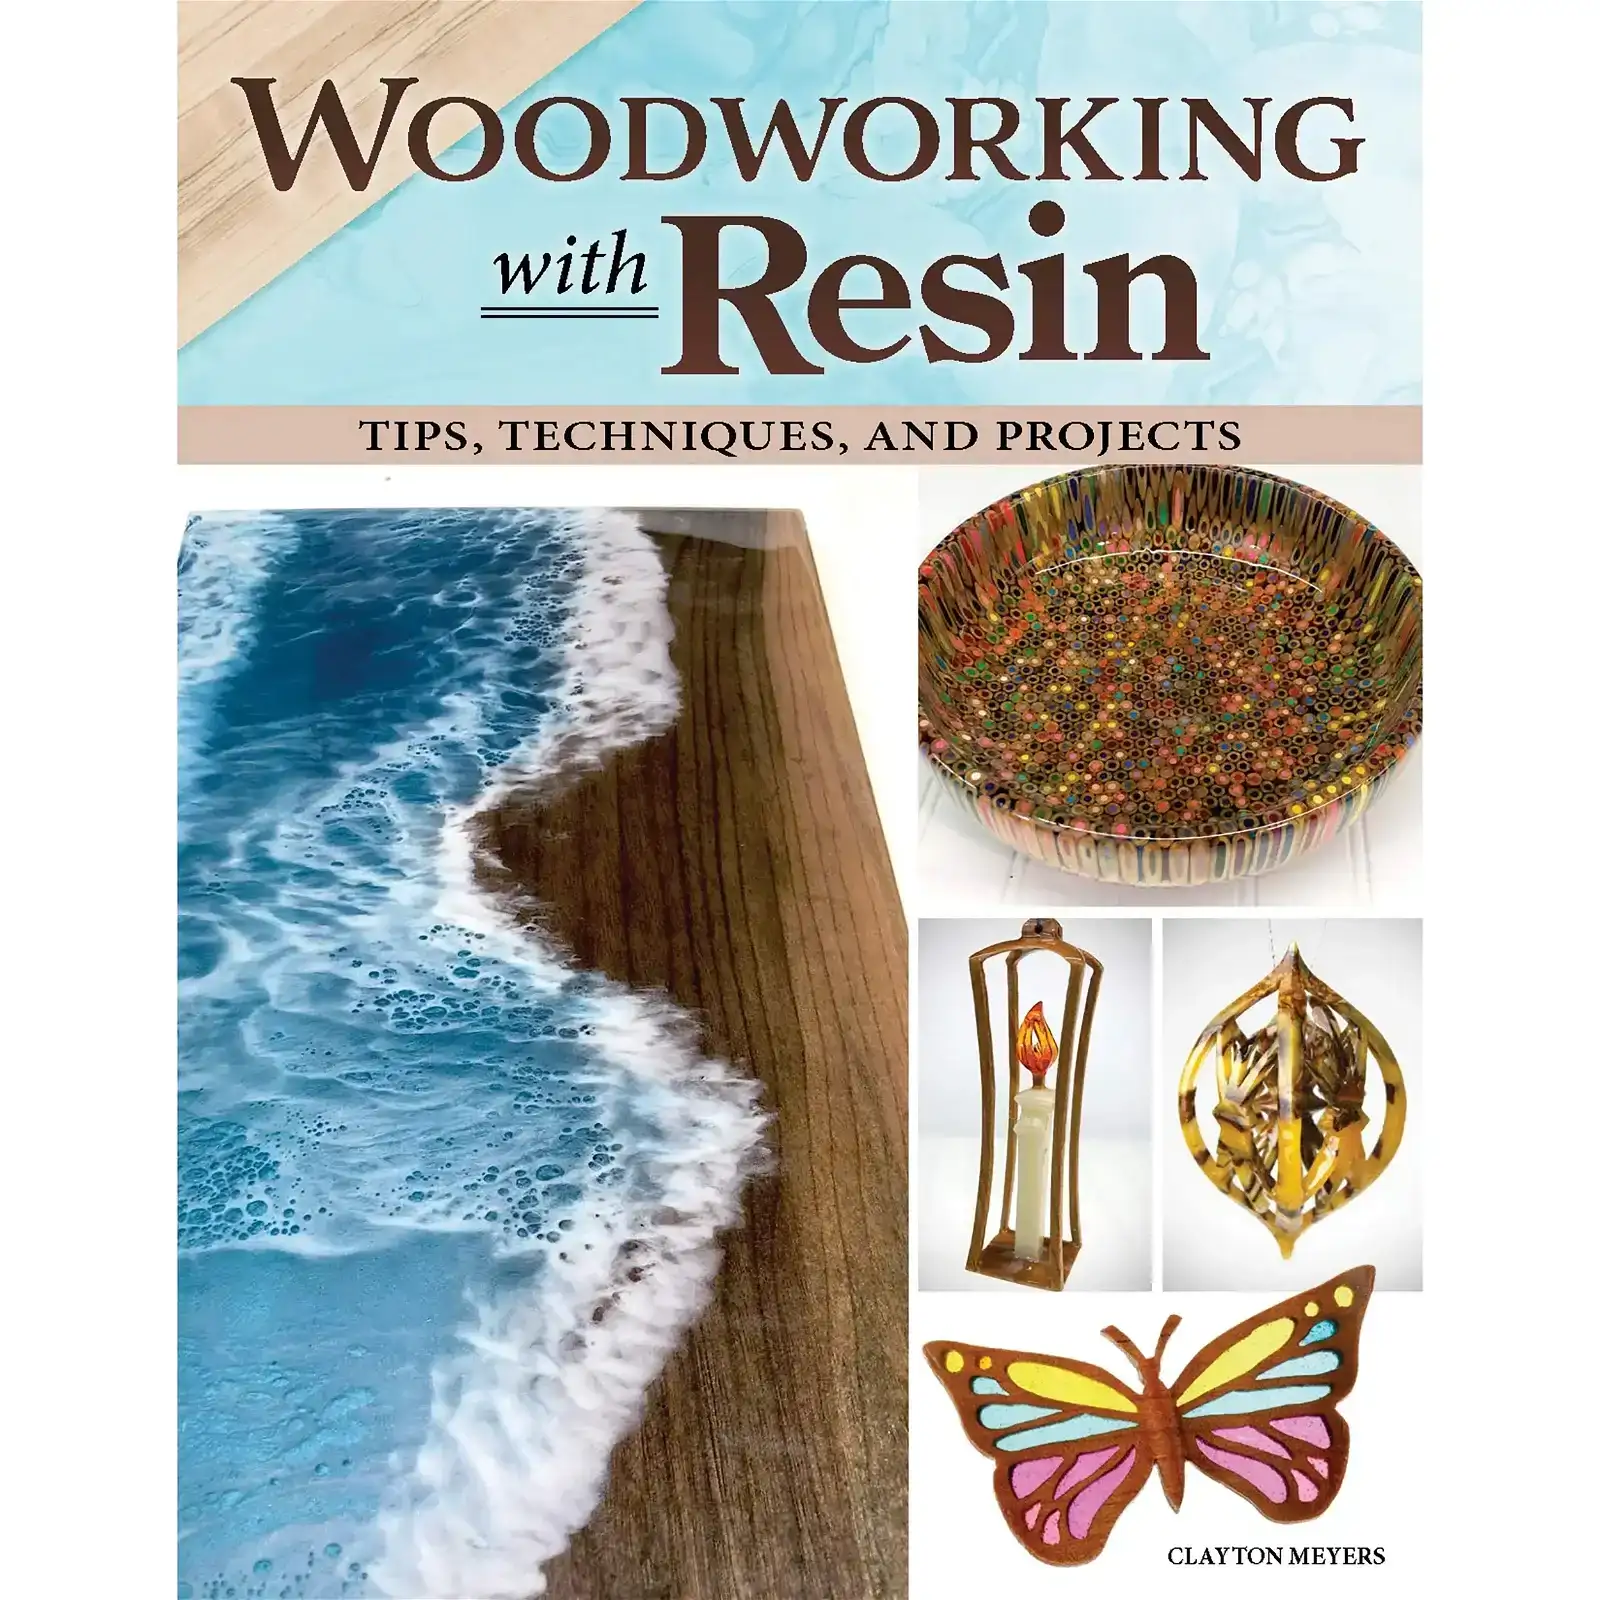 NEW - Fox Chapel Publishing® Woodworking with Resin: Tips, Techniques & Projects by Clayton Meyers